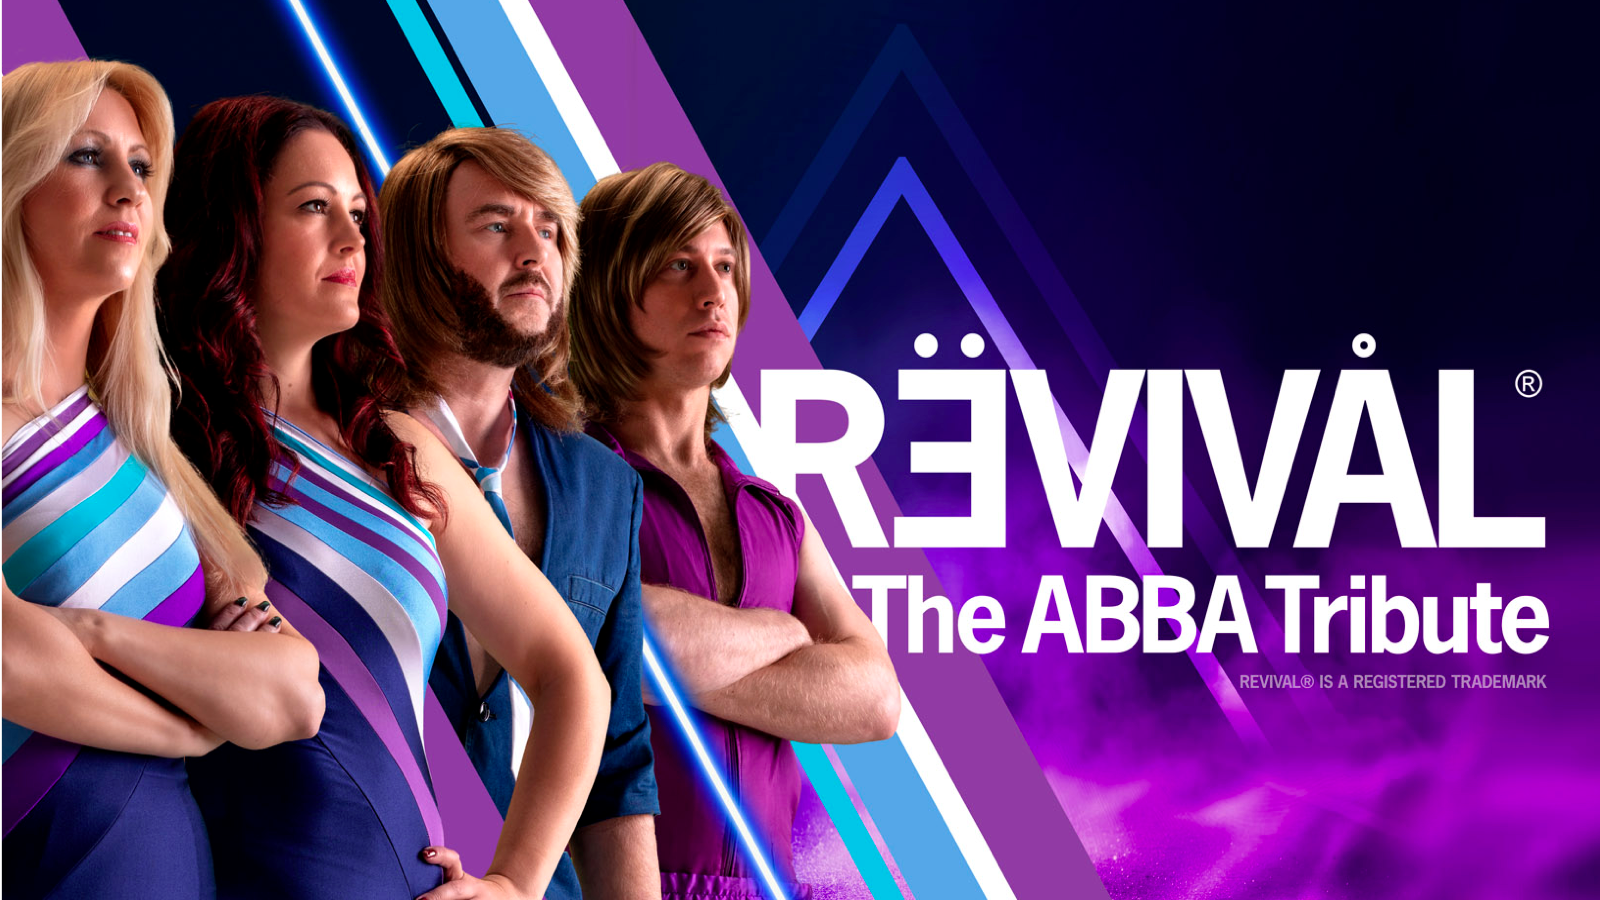 ABBA GOLD PARTY NIGHT –  featuring the No.1 Tribute ABBA REVIVAL LIVE